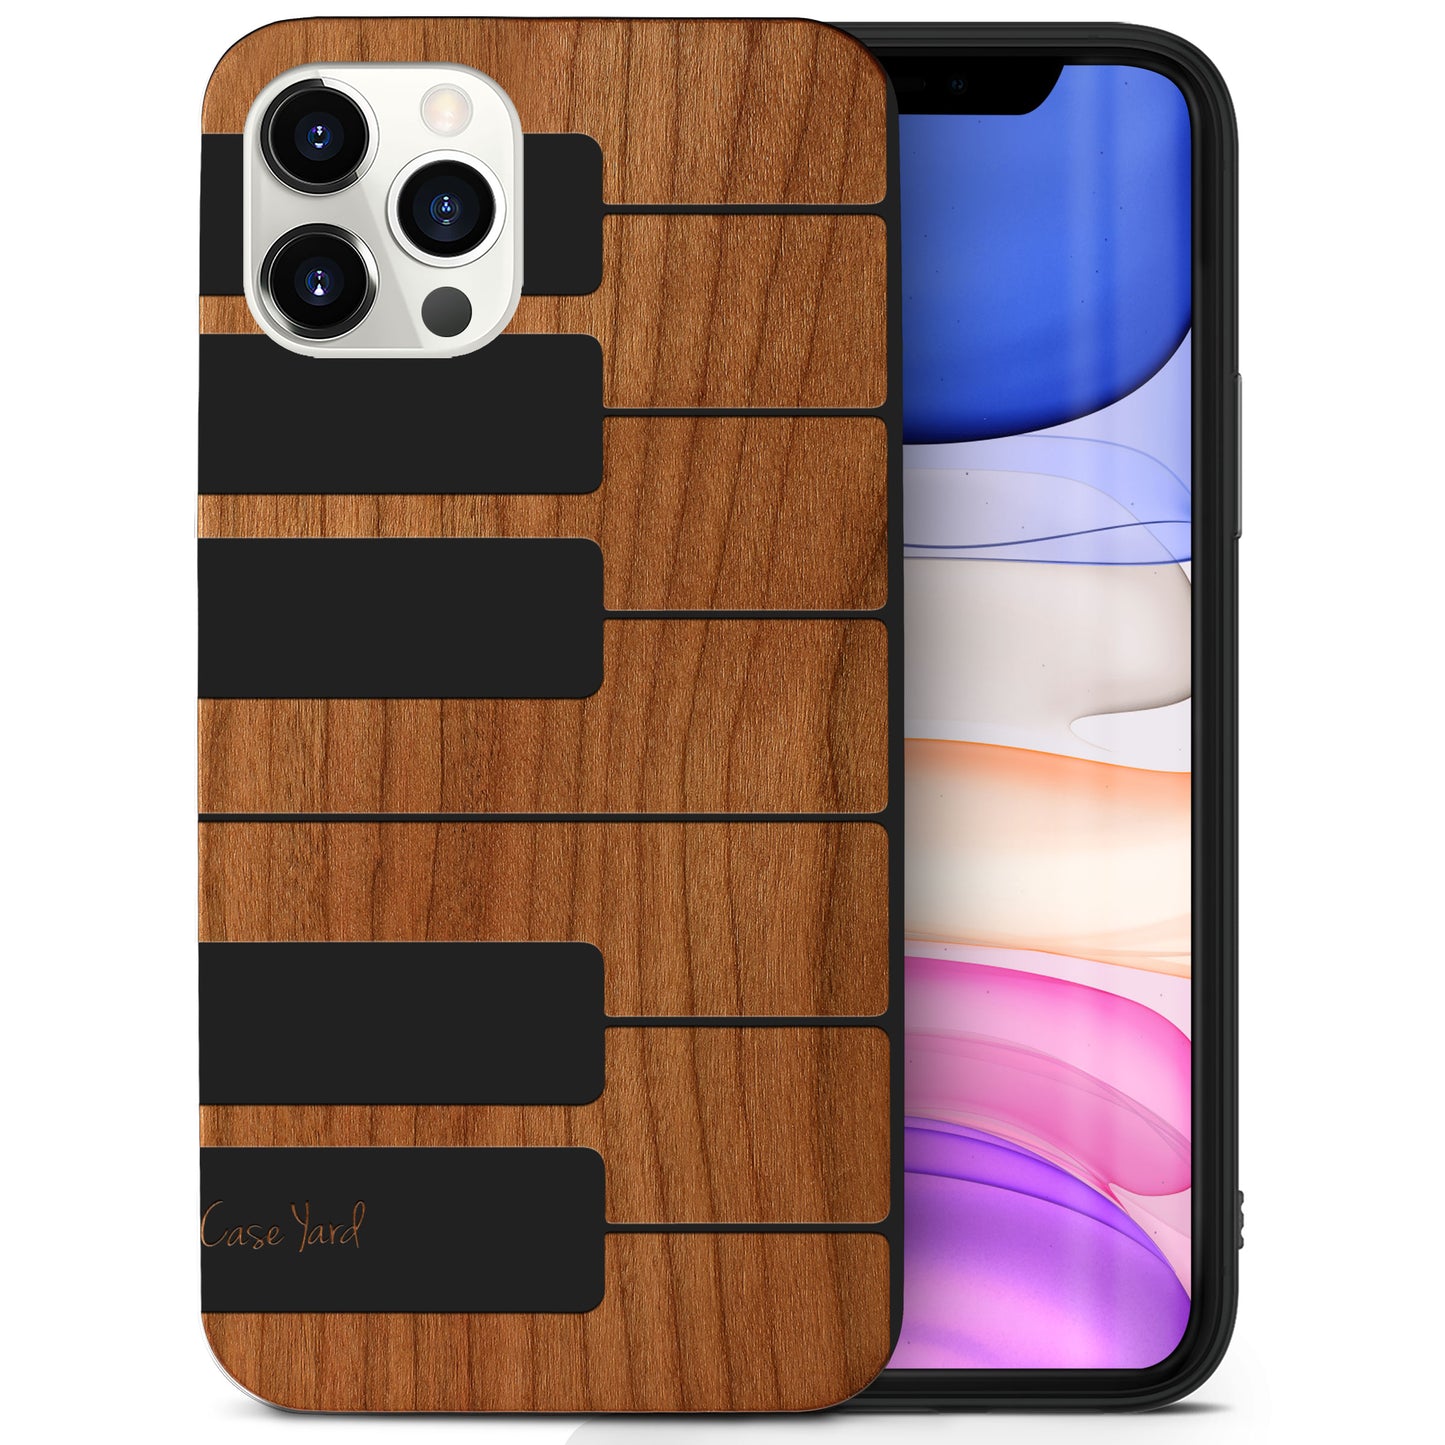 Wooden Cell Phone Case Cover, Laser Engraved case for iPhone & Samsung phone White Black Piano Design